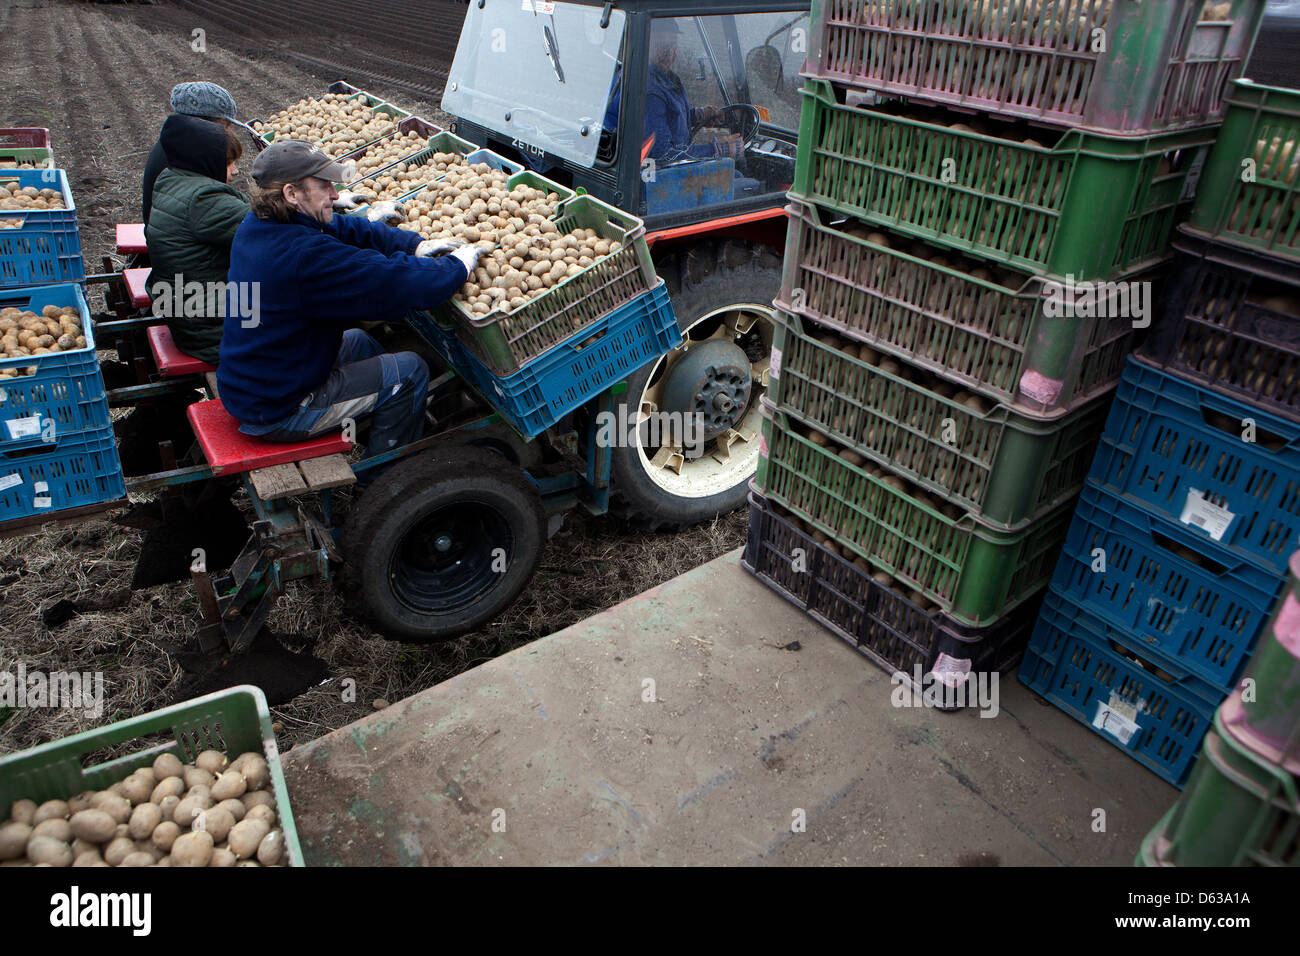 Spring planting potatoes, Farmers with potatoes in boxes Czech Republic farmer Stock Photo